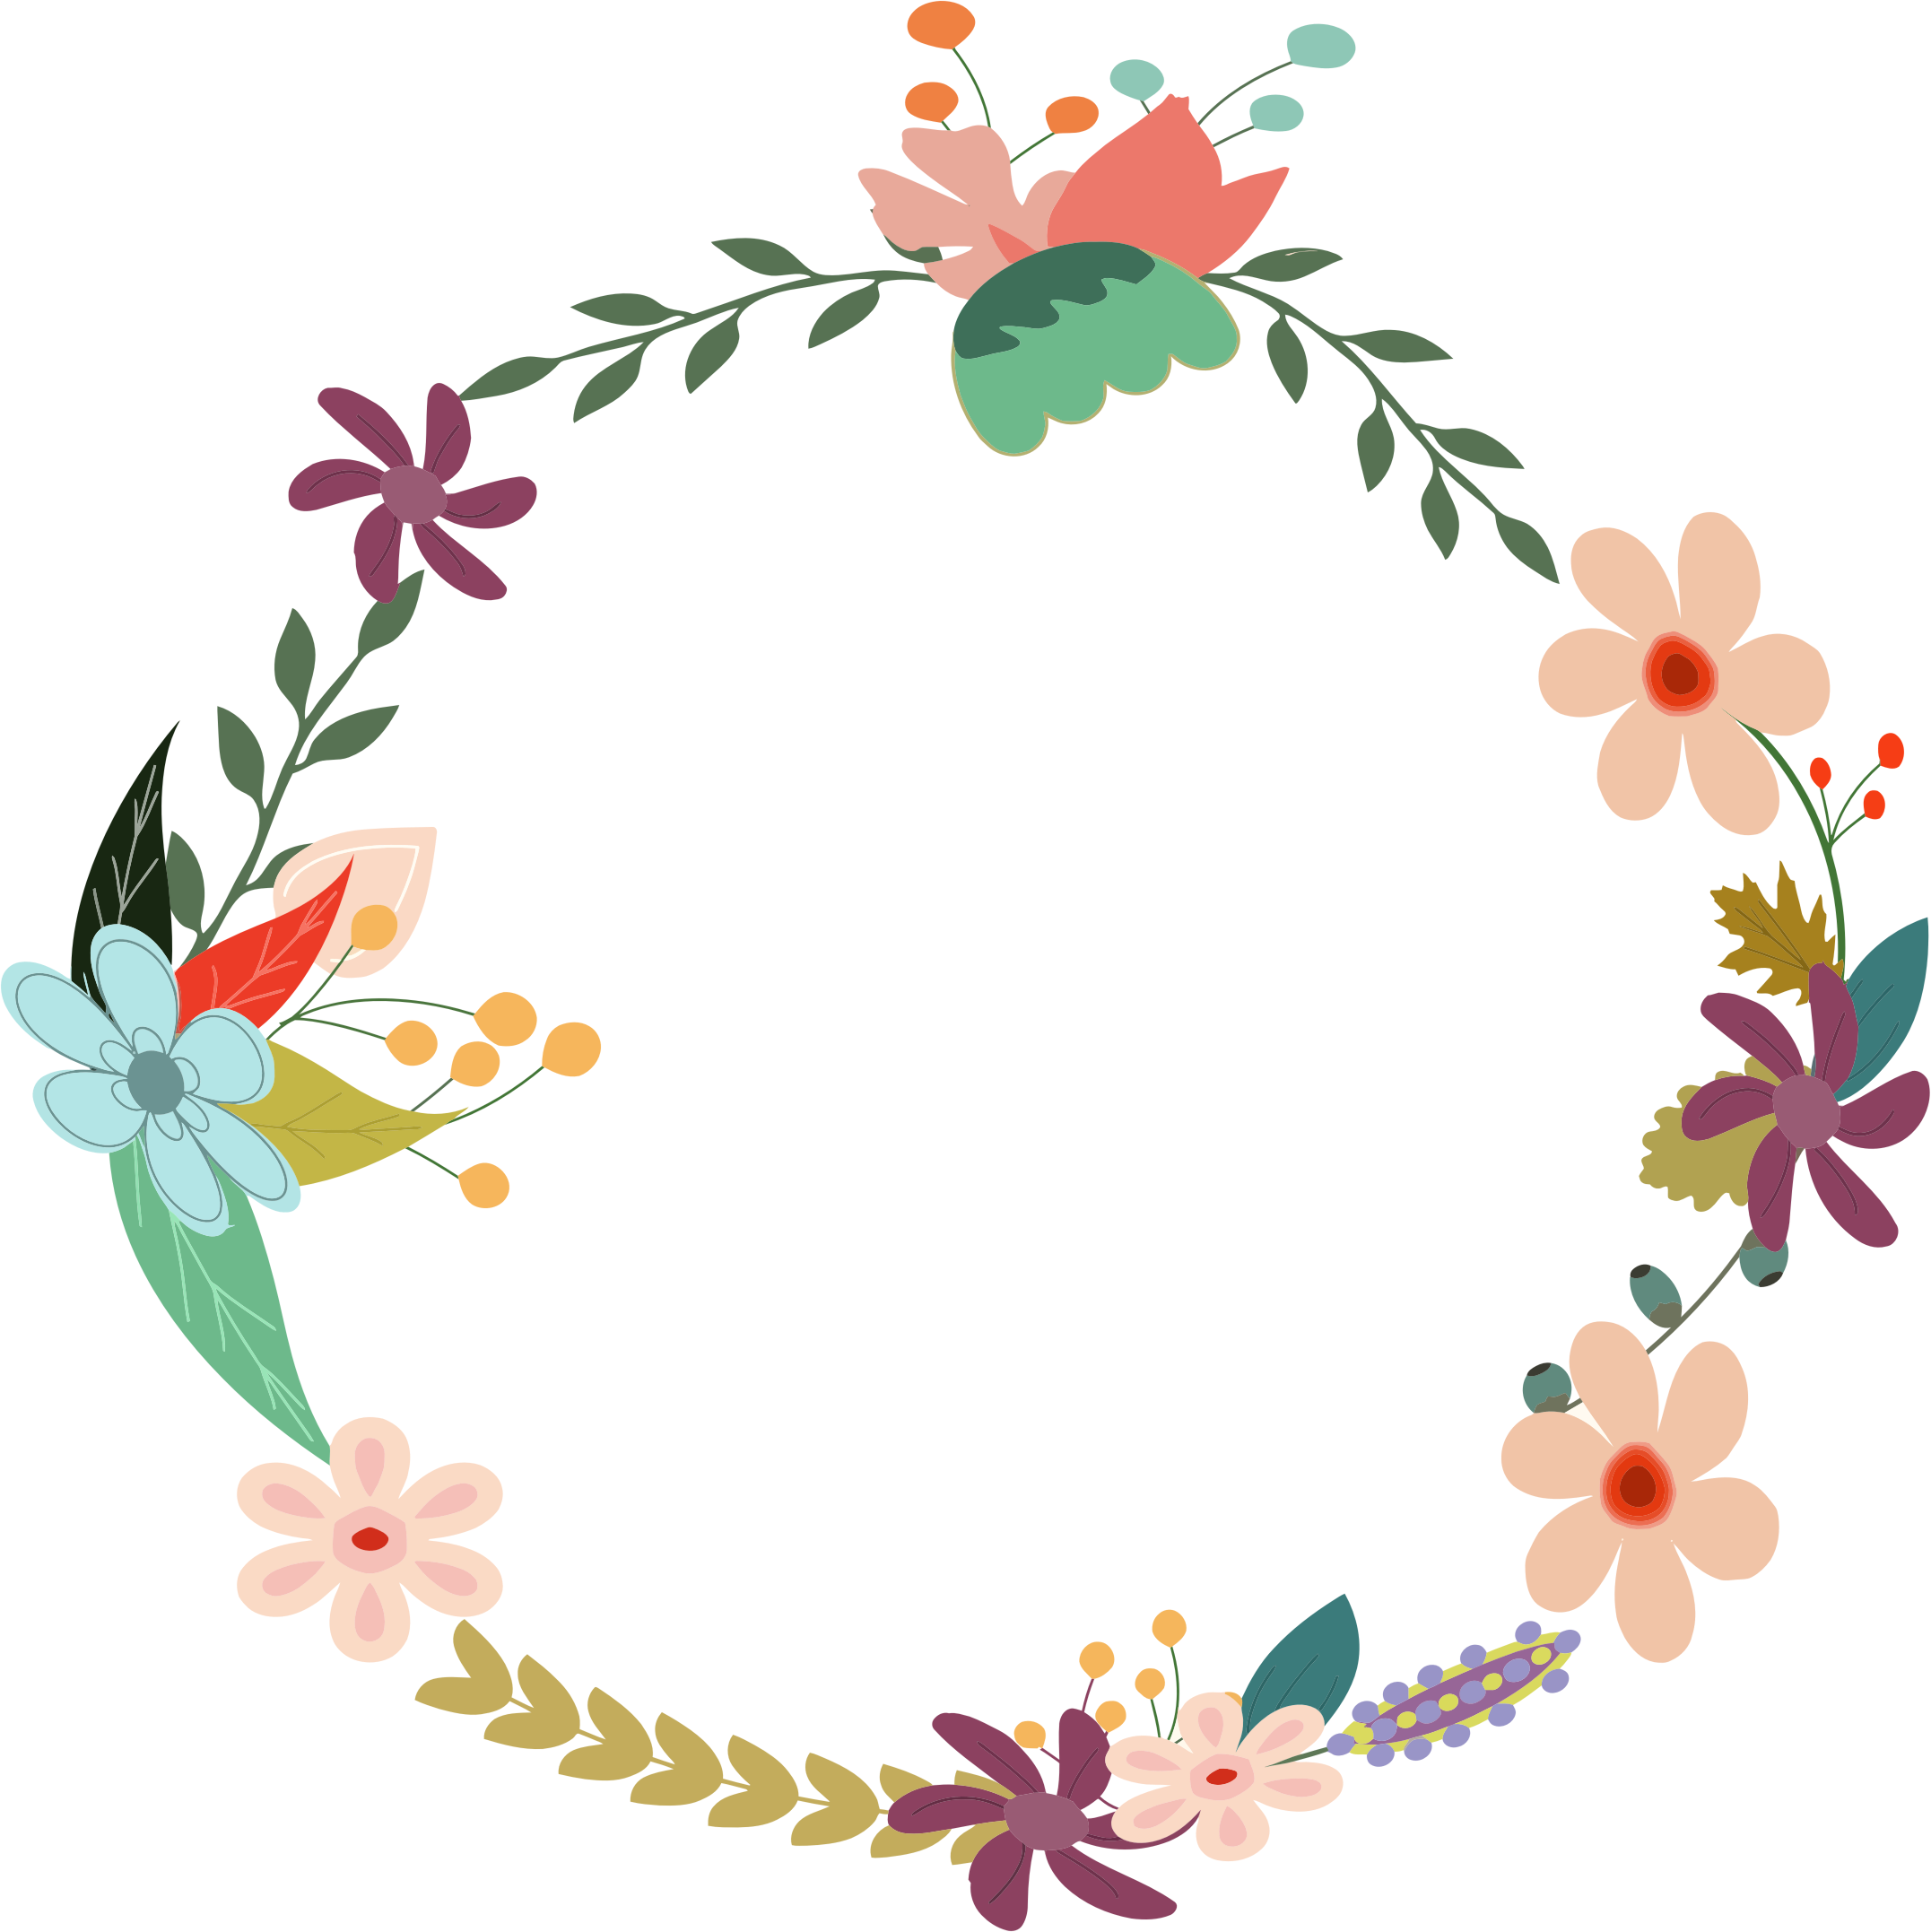 Garland clipart spring.  collection of free